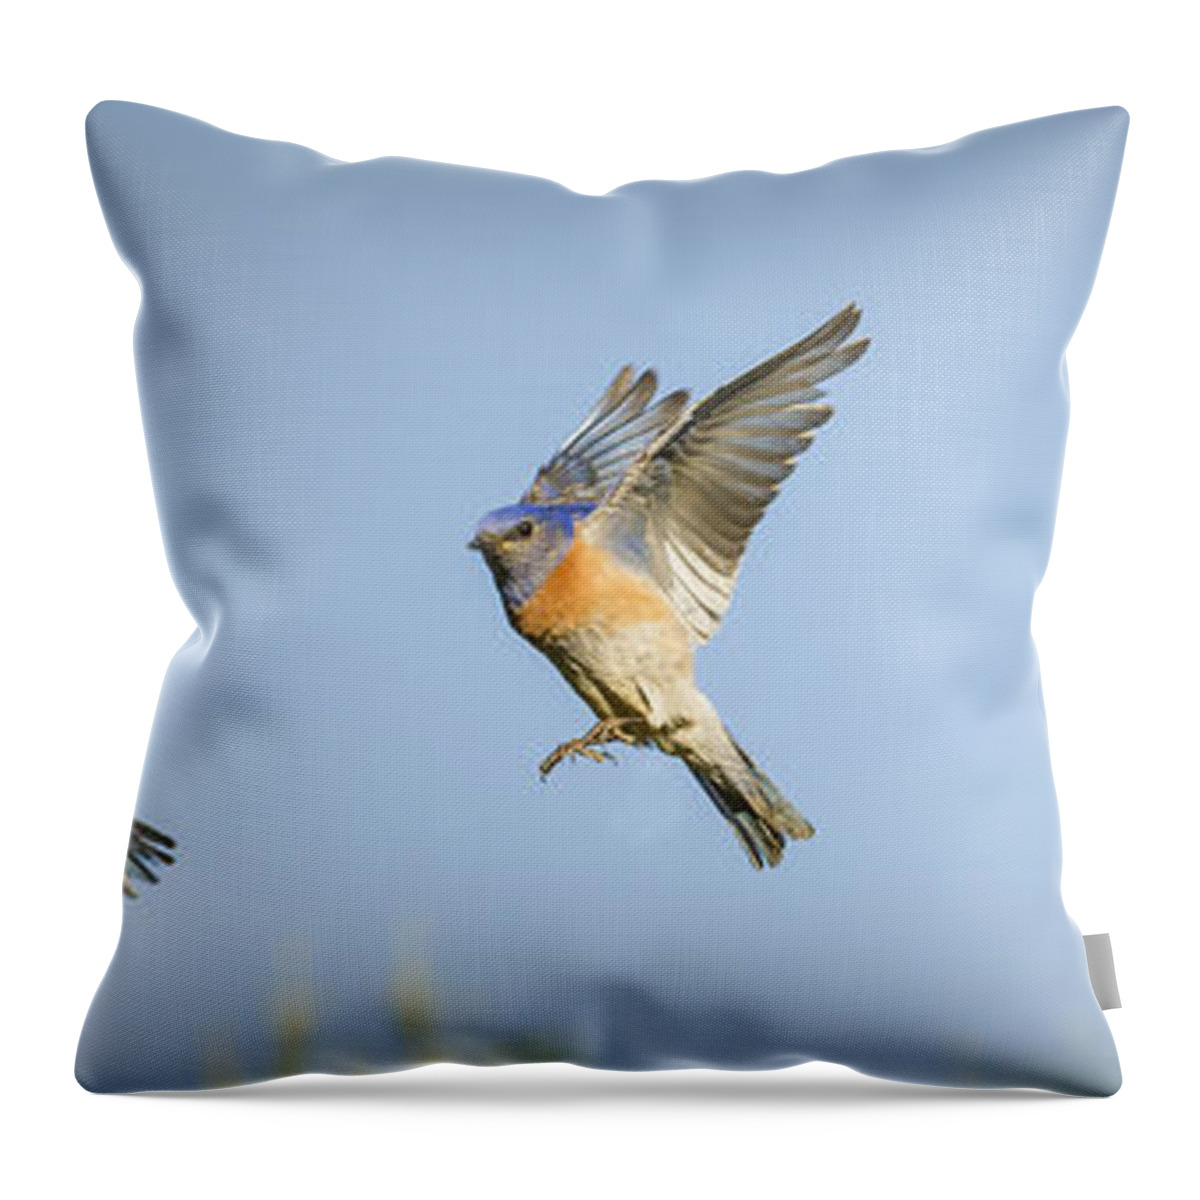 Birds Throw Pillow featuring the photograph Flying by Jean Noren